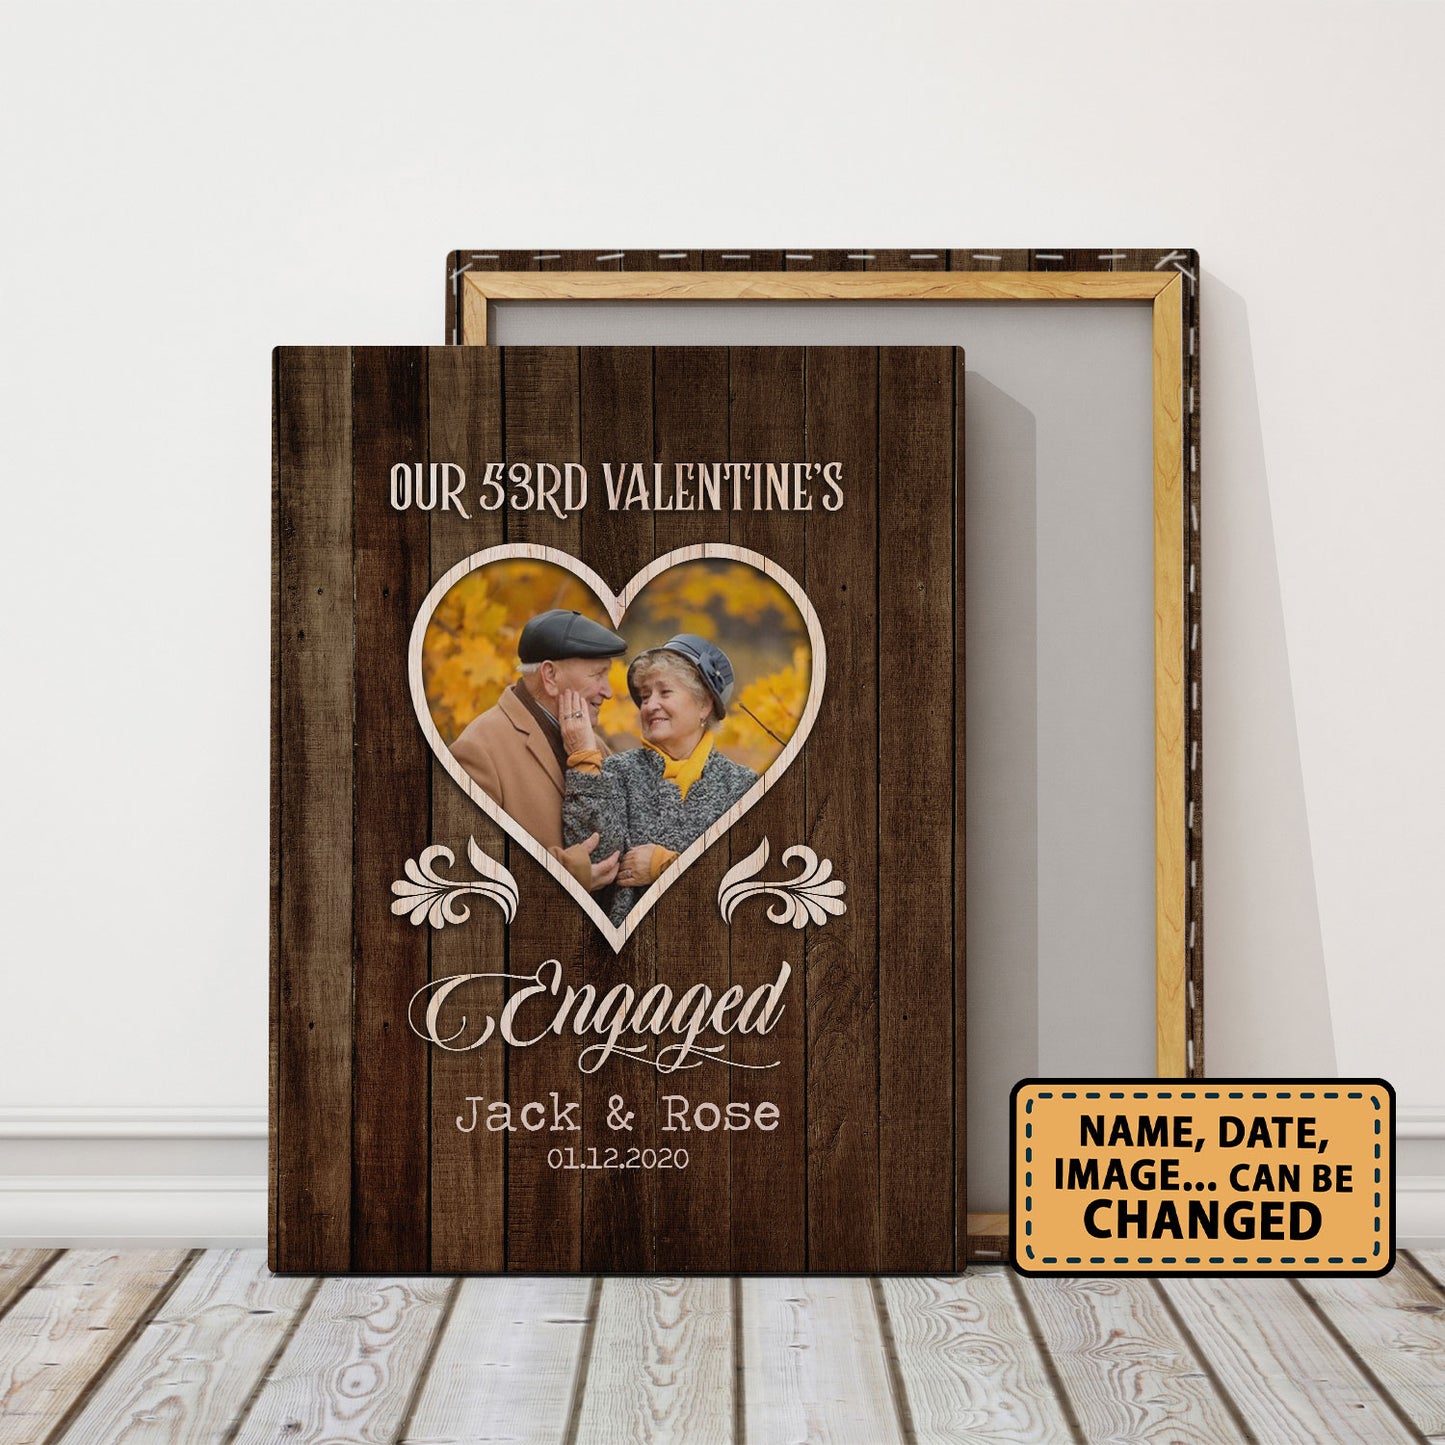 Our 53rd Valentine’s Day Engaged Custom Image Anniversary Canvas